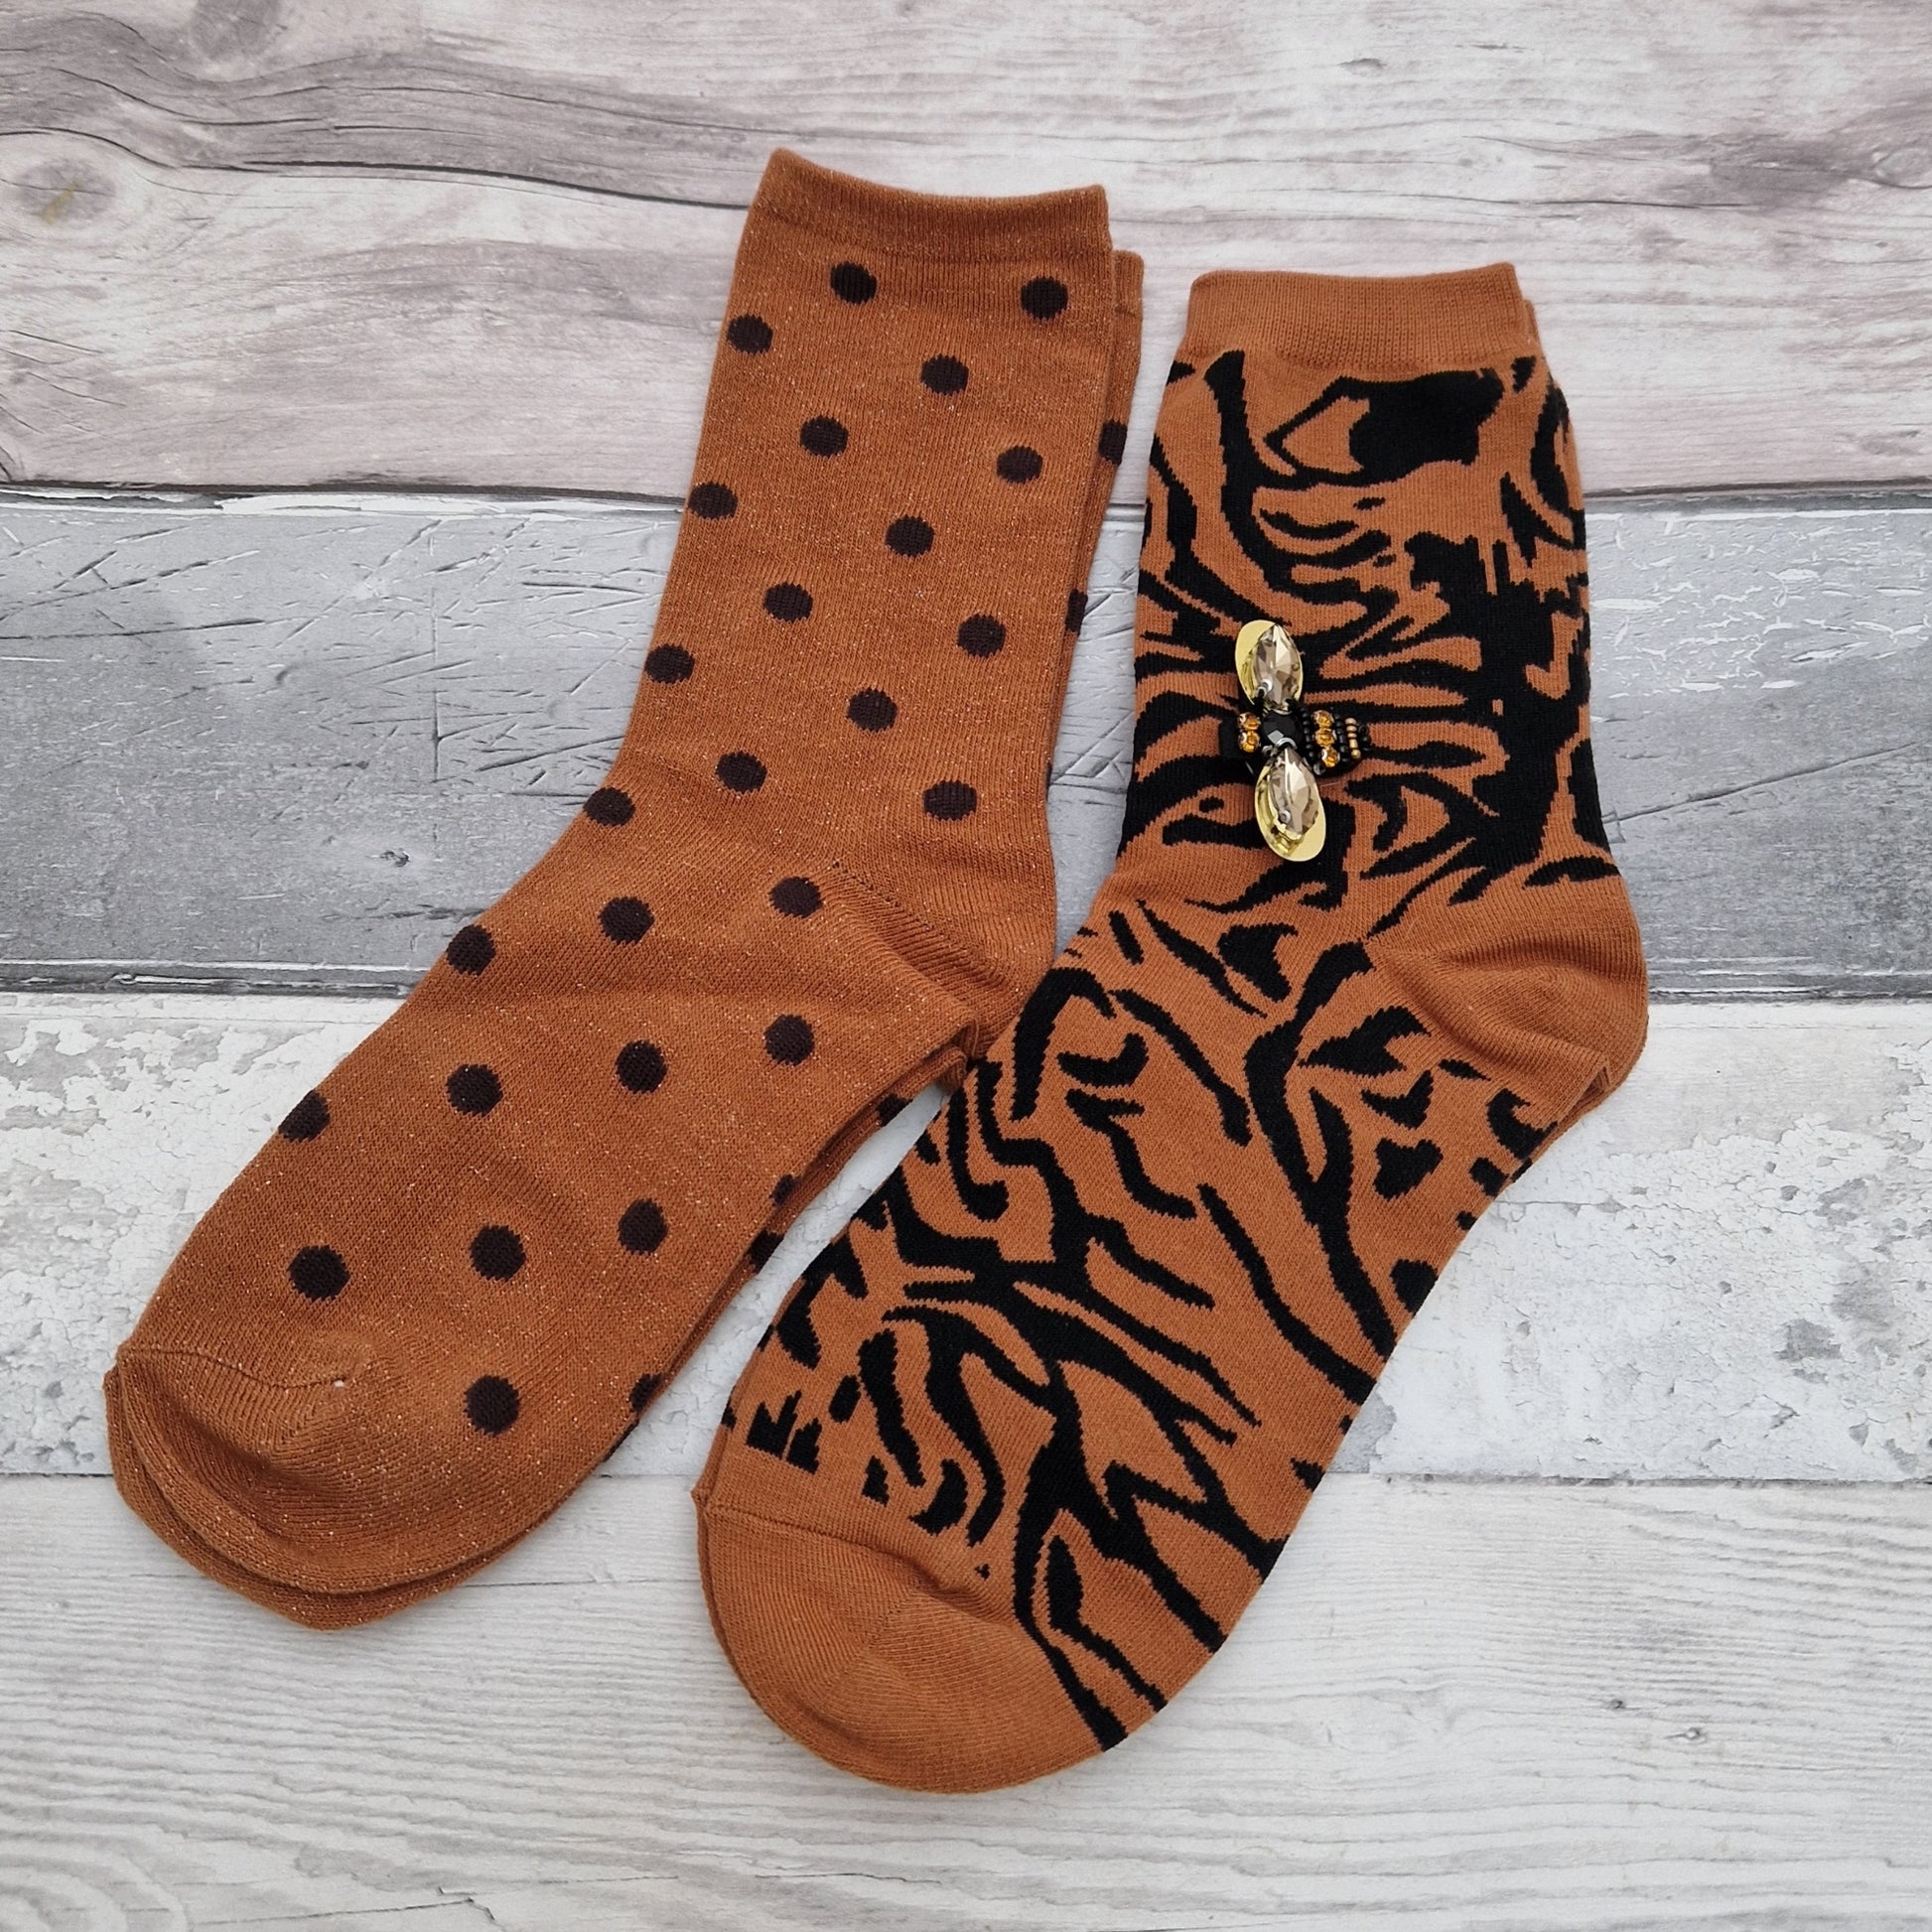 2 Pairs of rust coloured socks presented in a gift box with a sparkling Bee Brooch made of recycled glass.